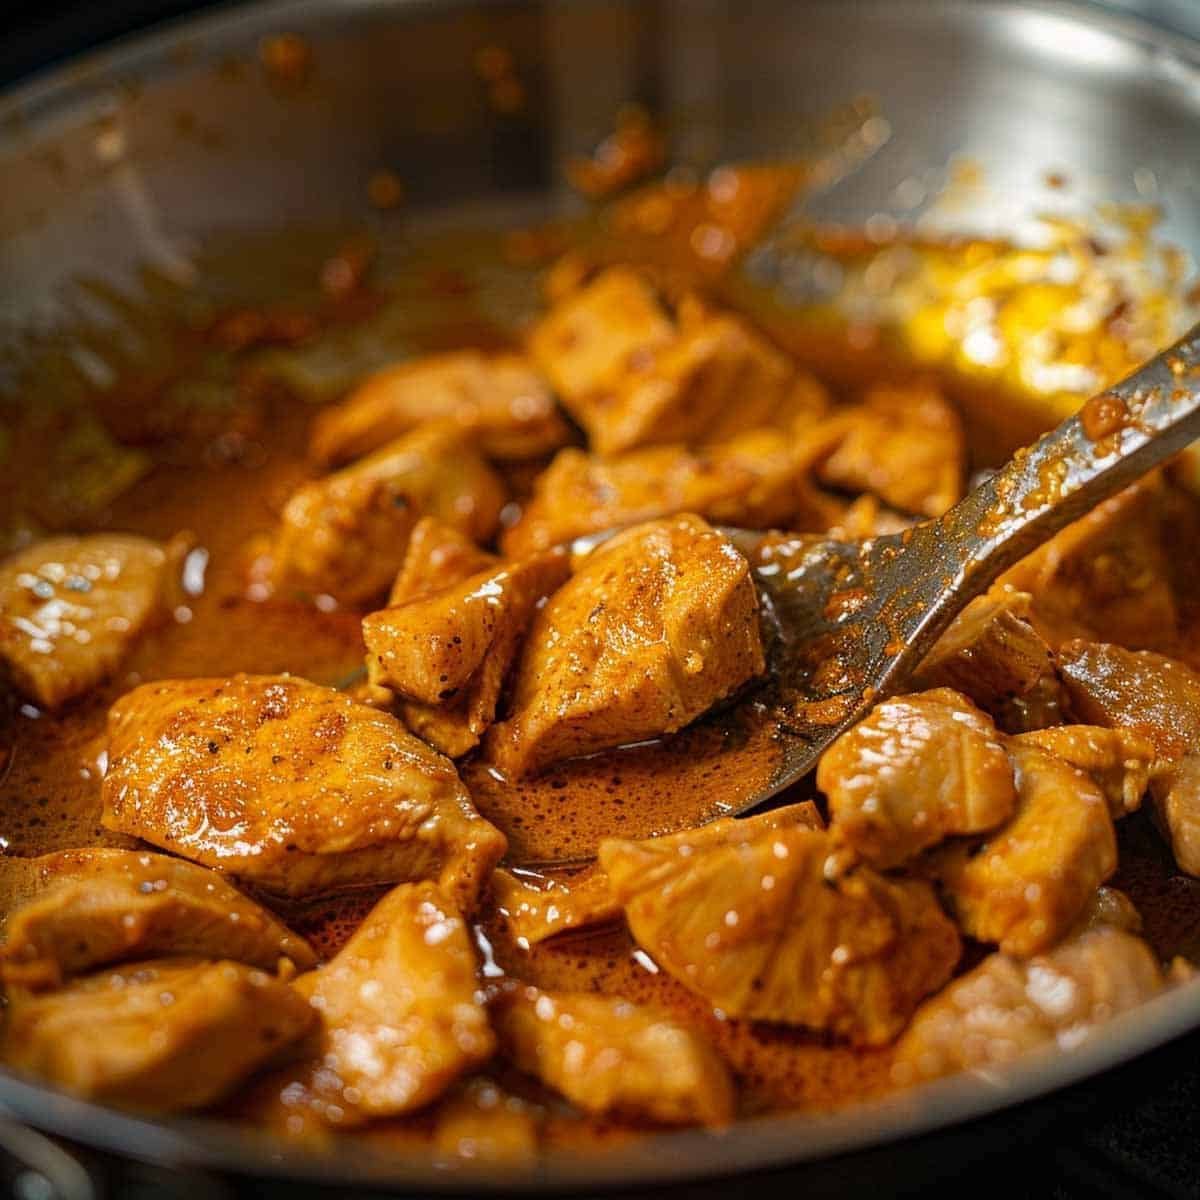 Chicken cooking in red curry in a saucepan, with vibrant red sauce and aromatic steam rising.